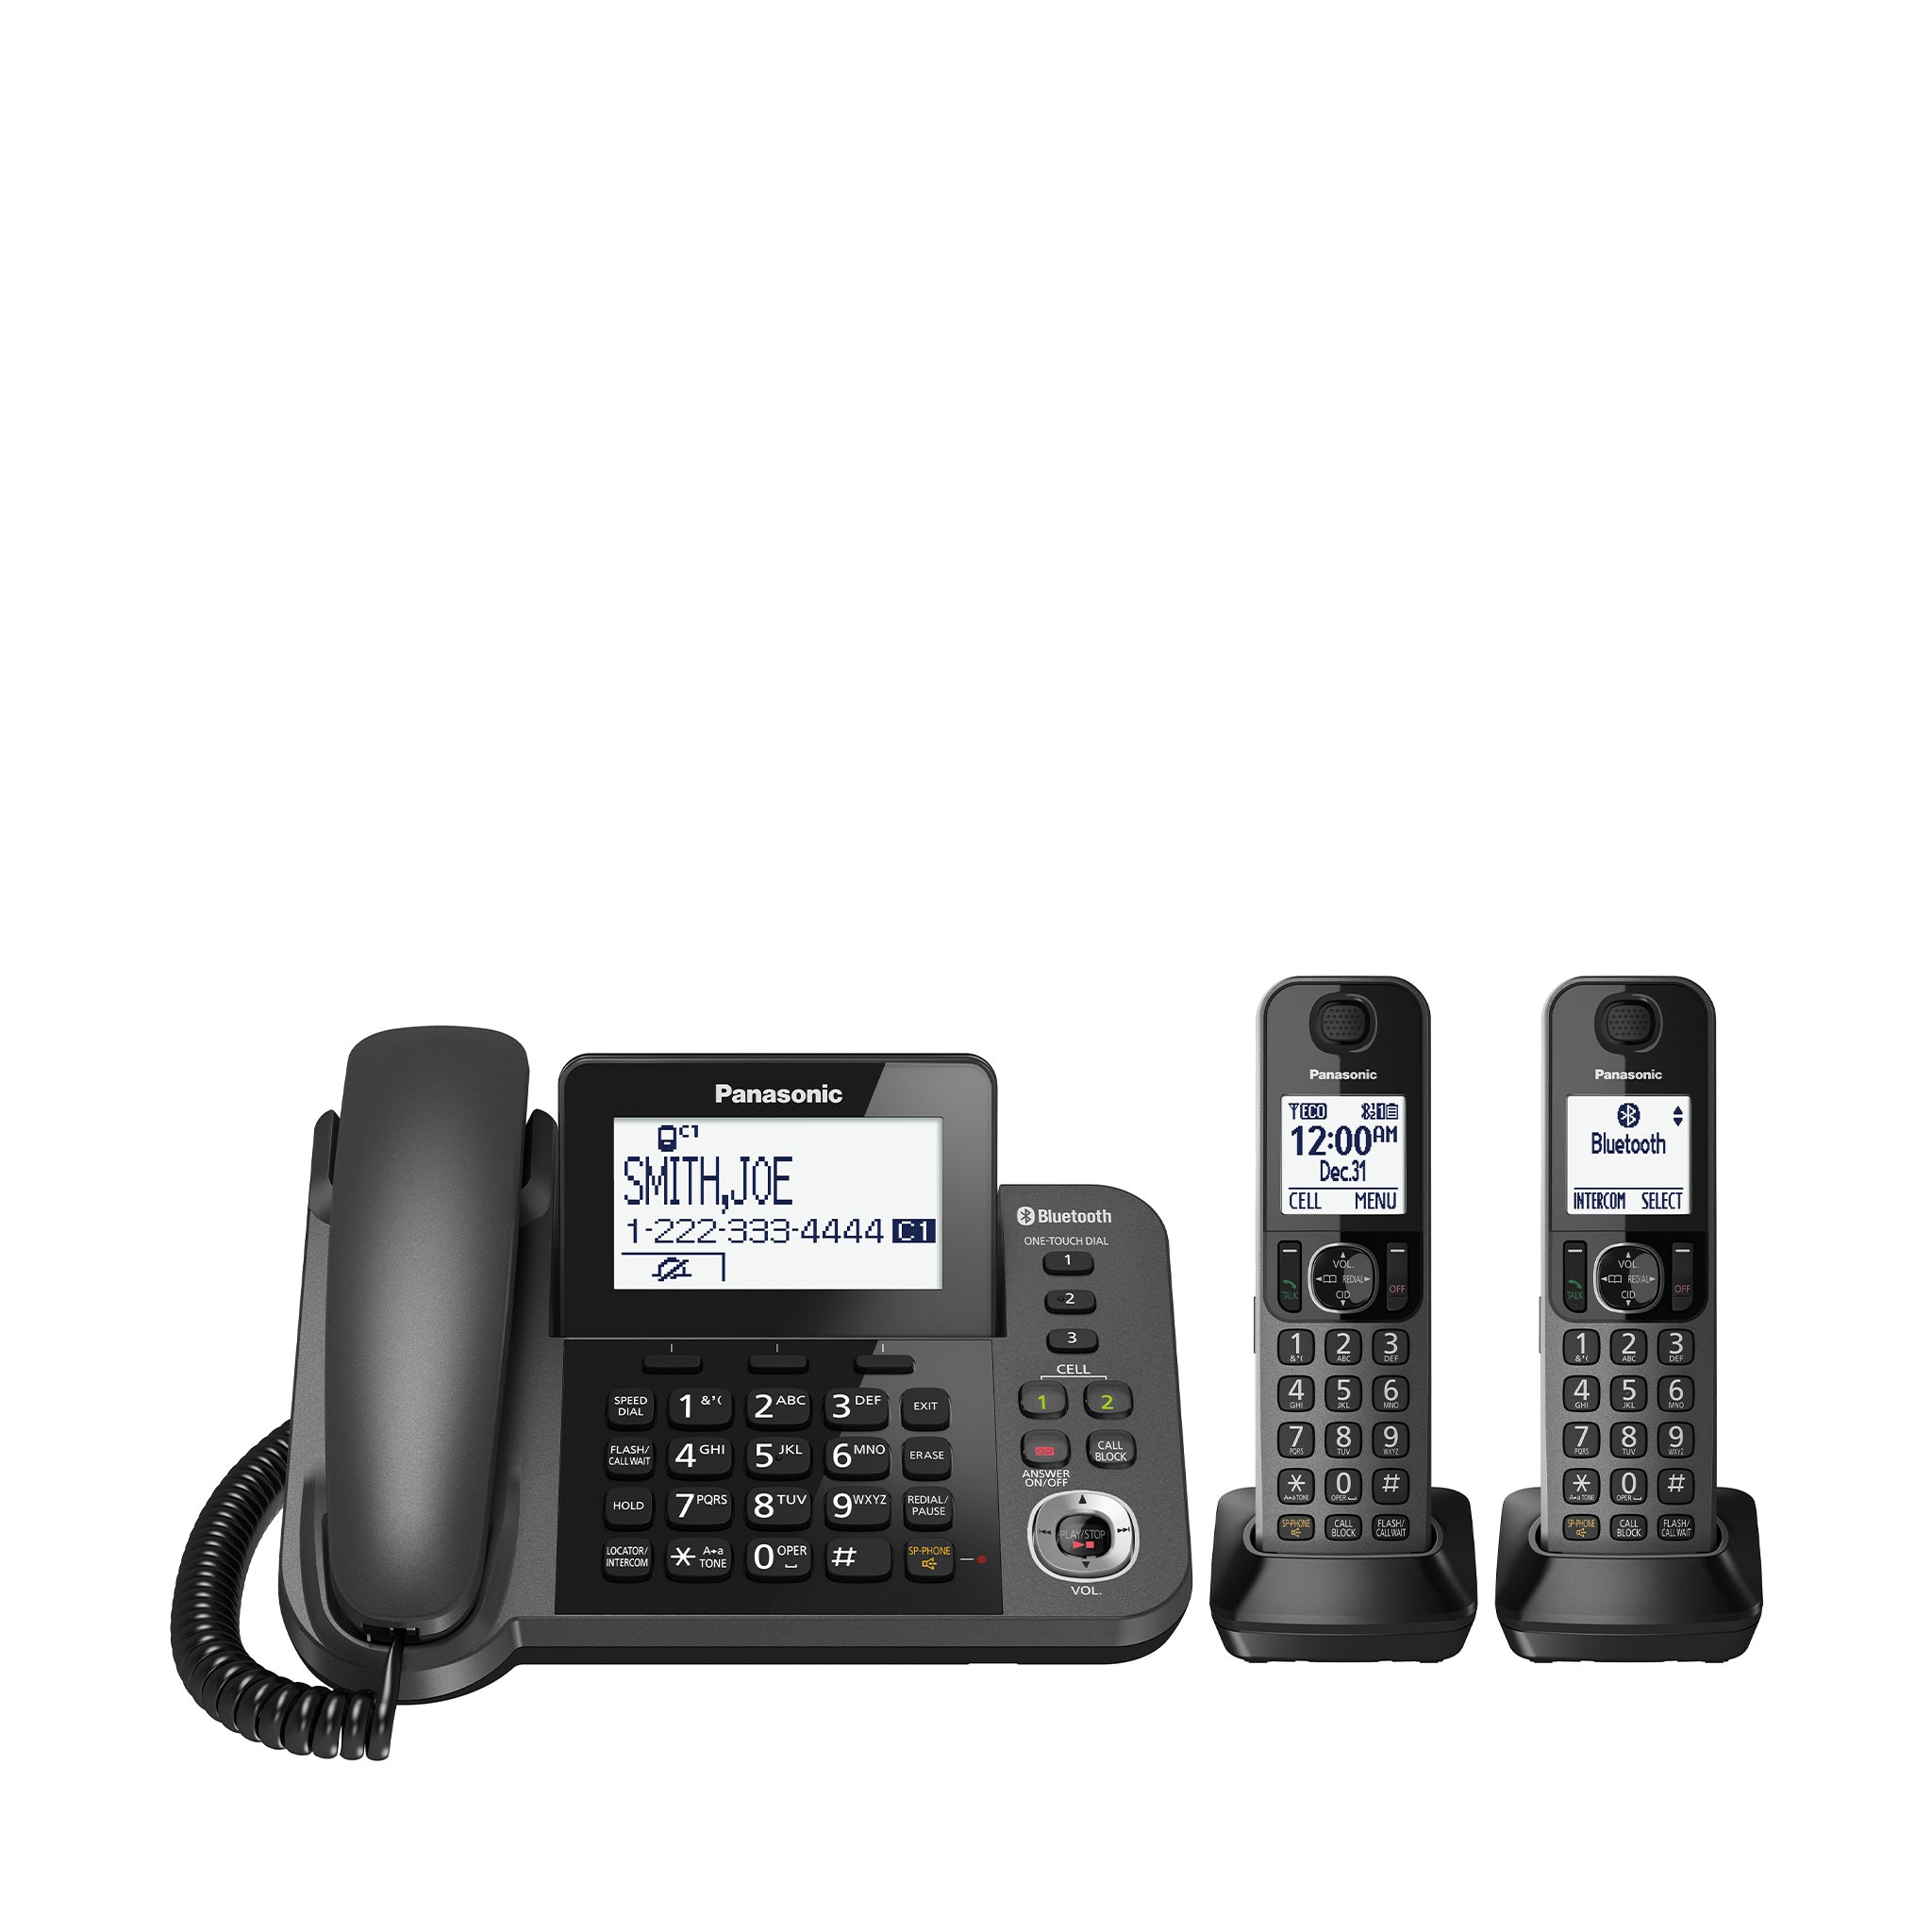 Machine 2 KX-TGF382M - System Panasonic Handsets, with Link2Cell Corded Digital Answering Corded Phone